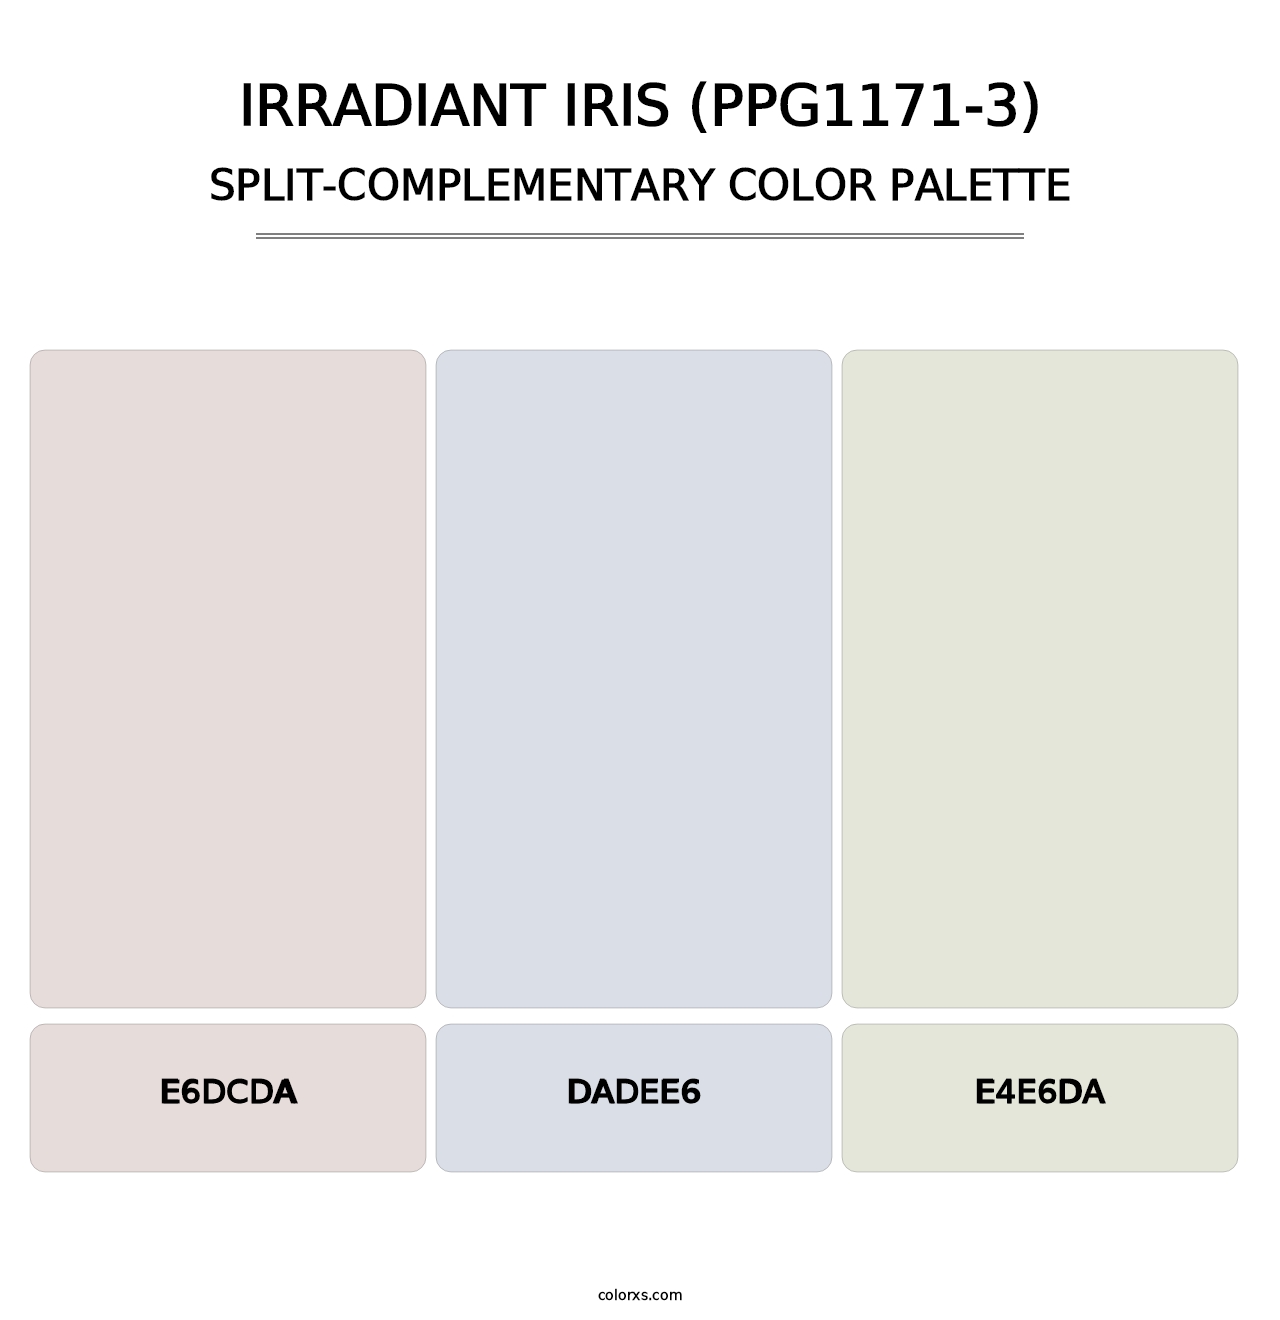 Irradiant Iris (PPG1171-3) - Split-Complementary Color Palette